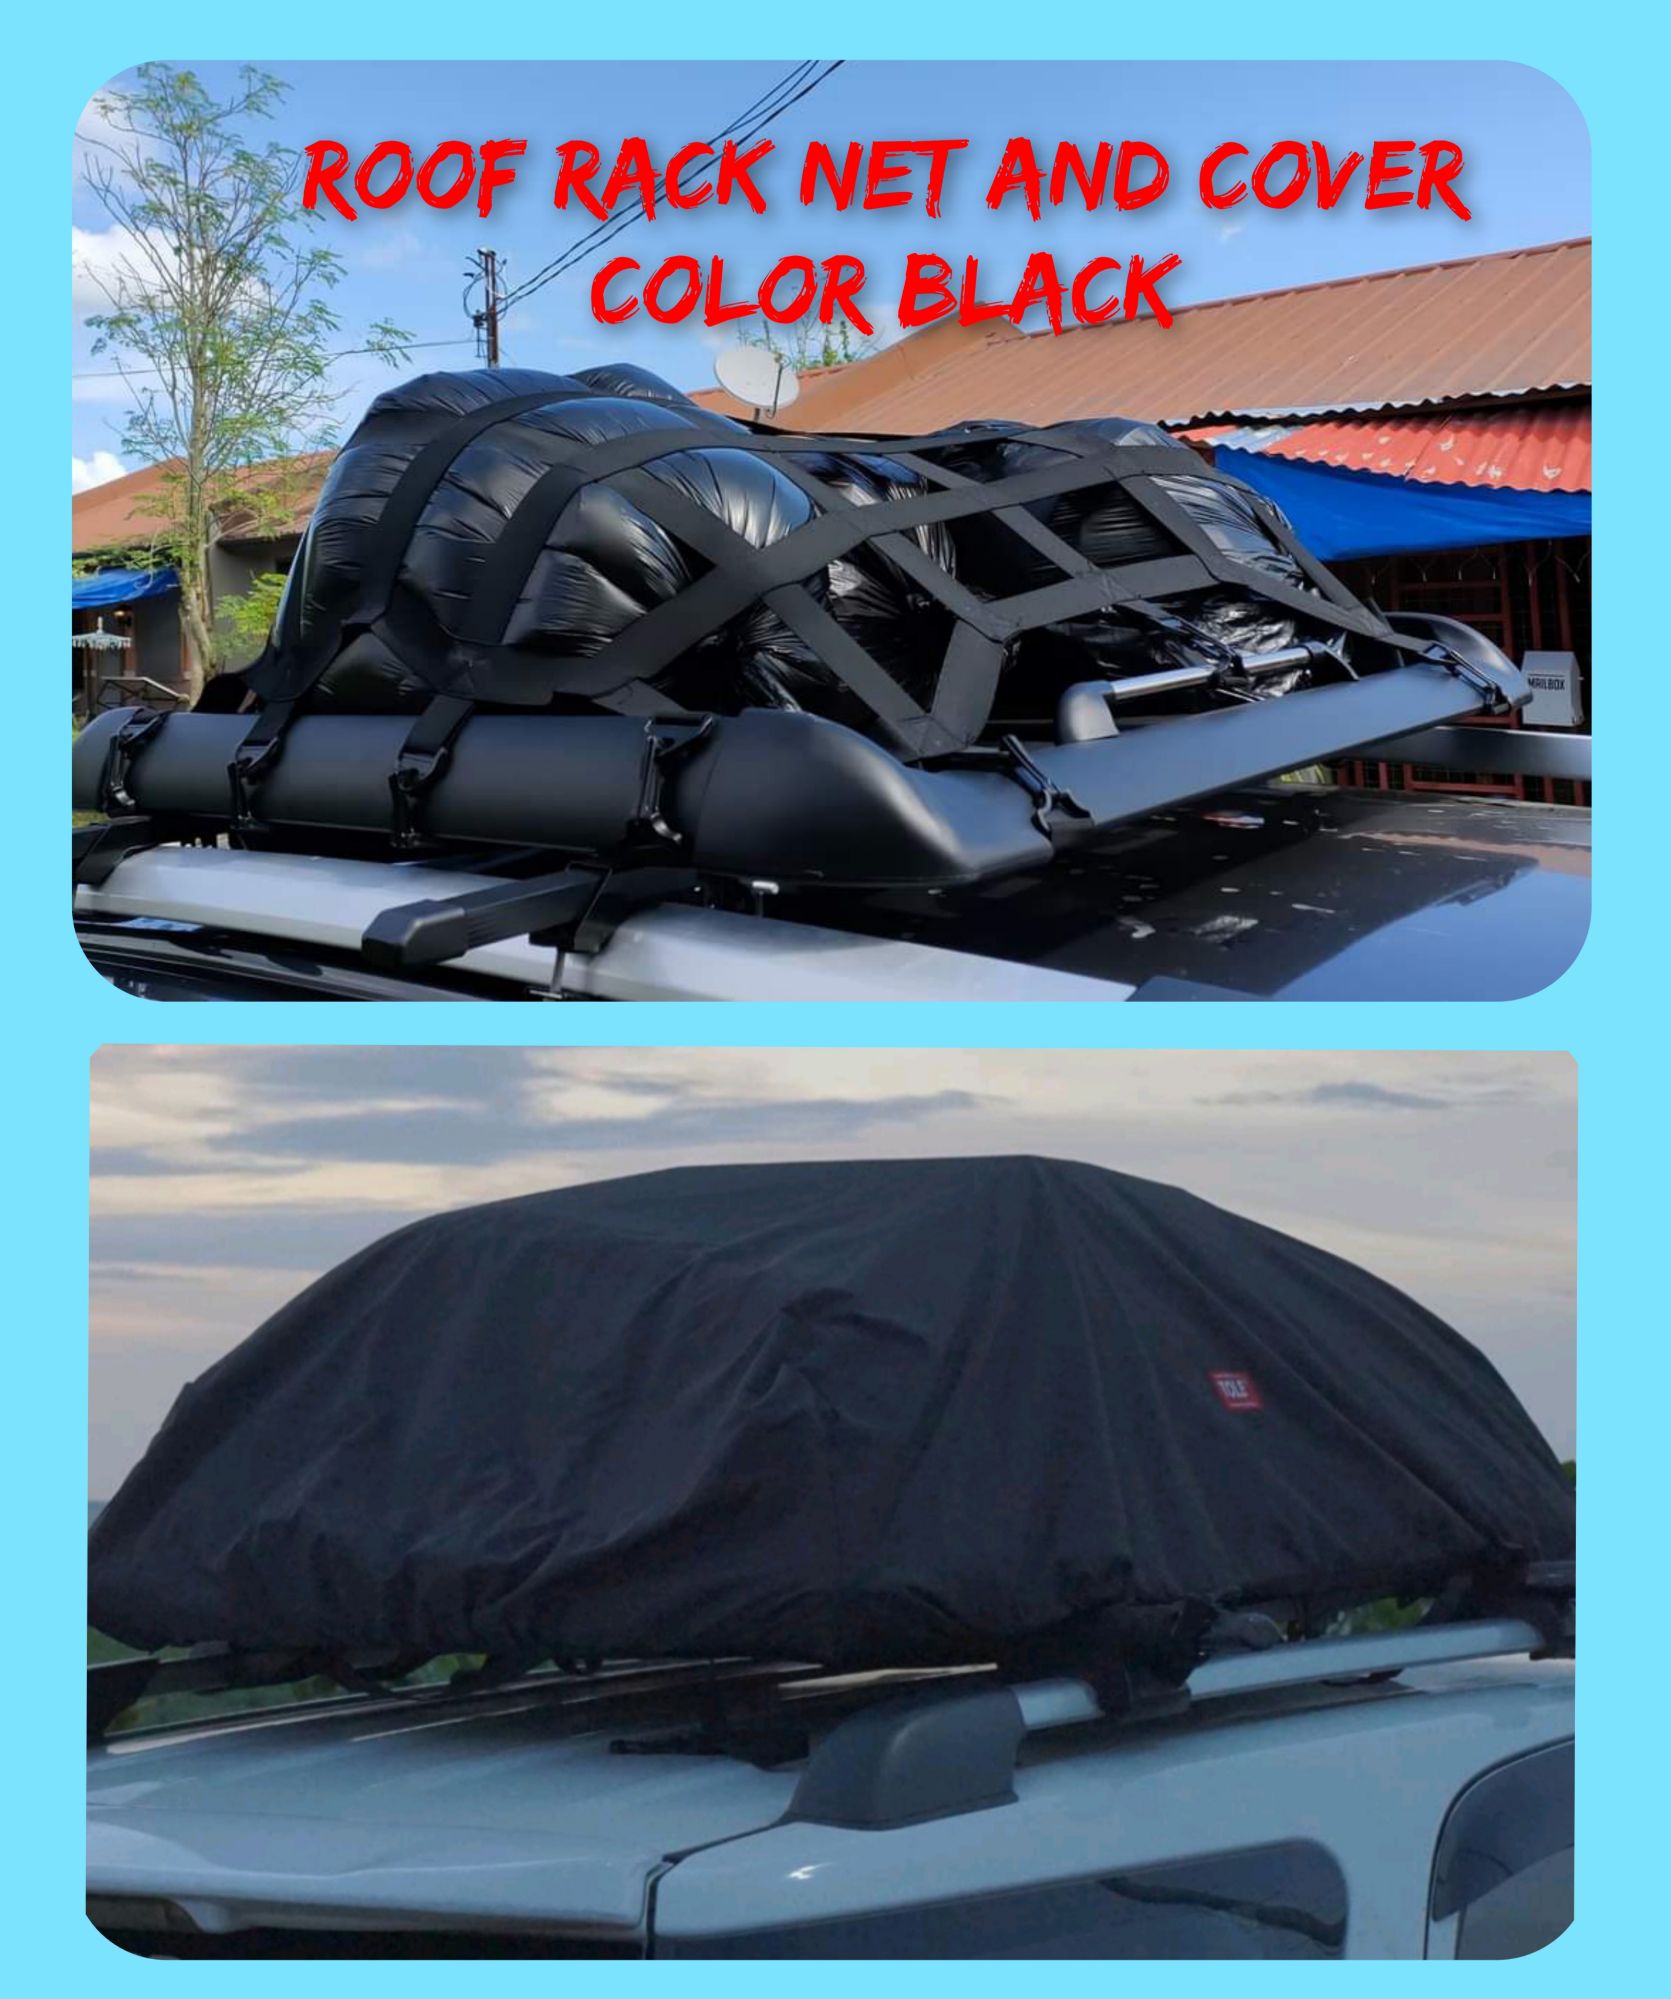 Roof rack net and cover black